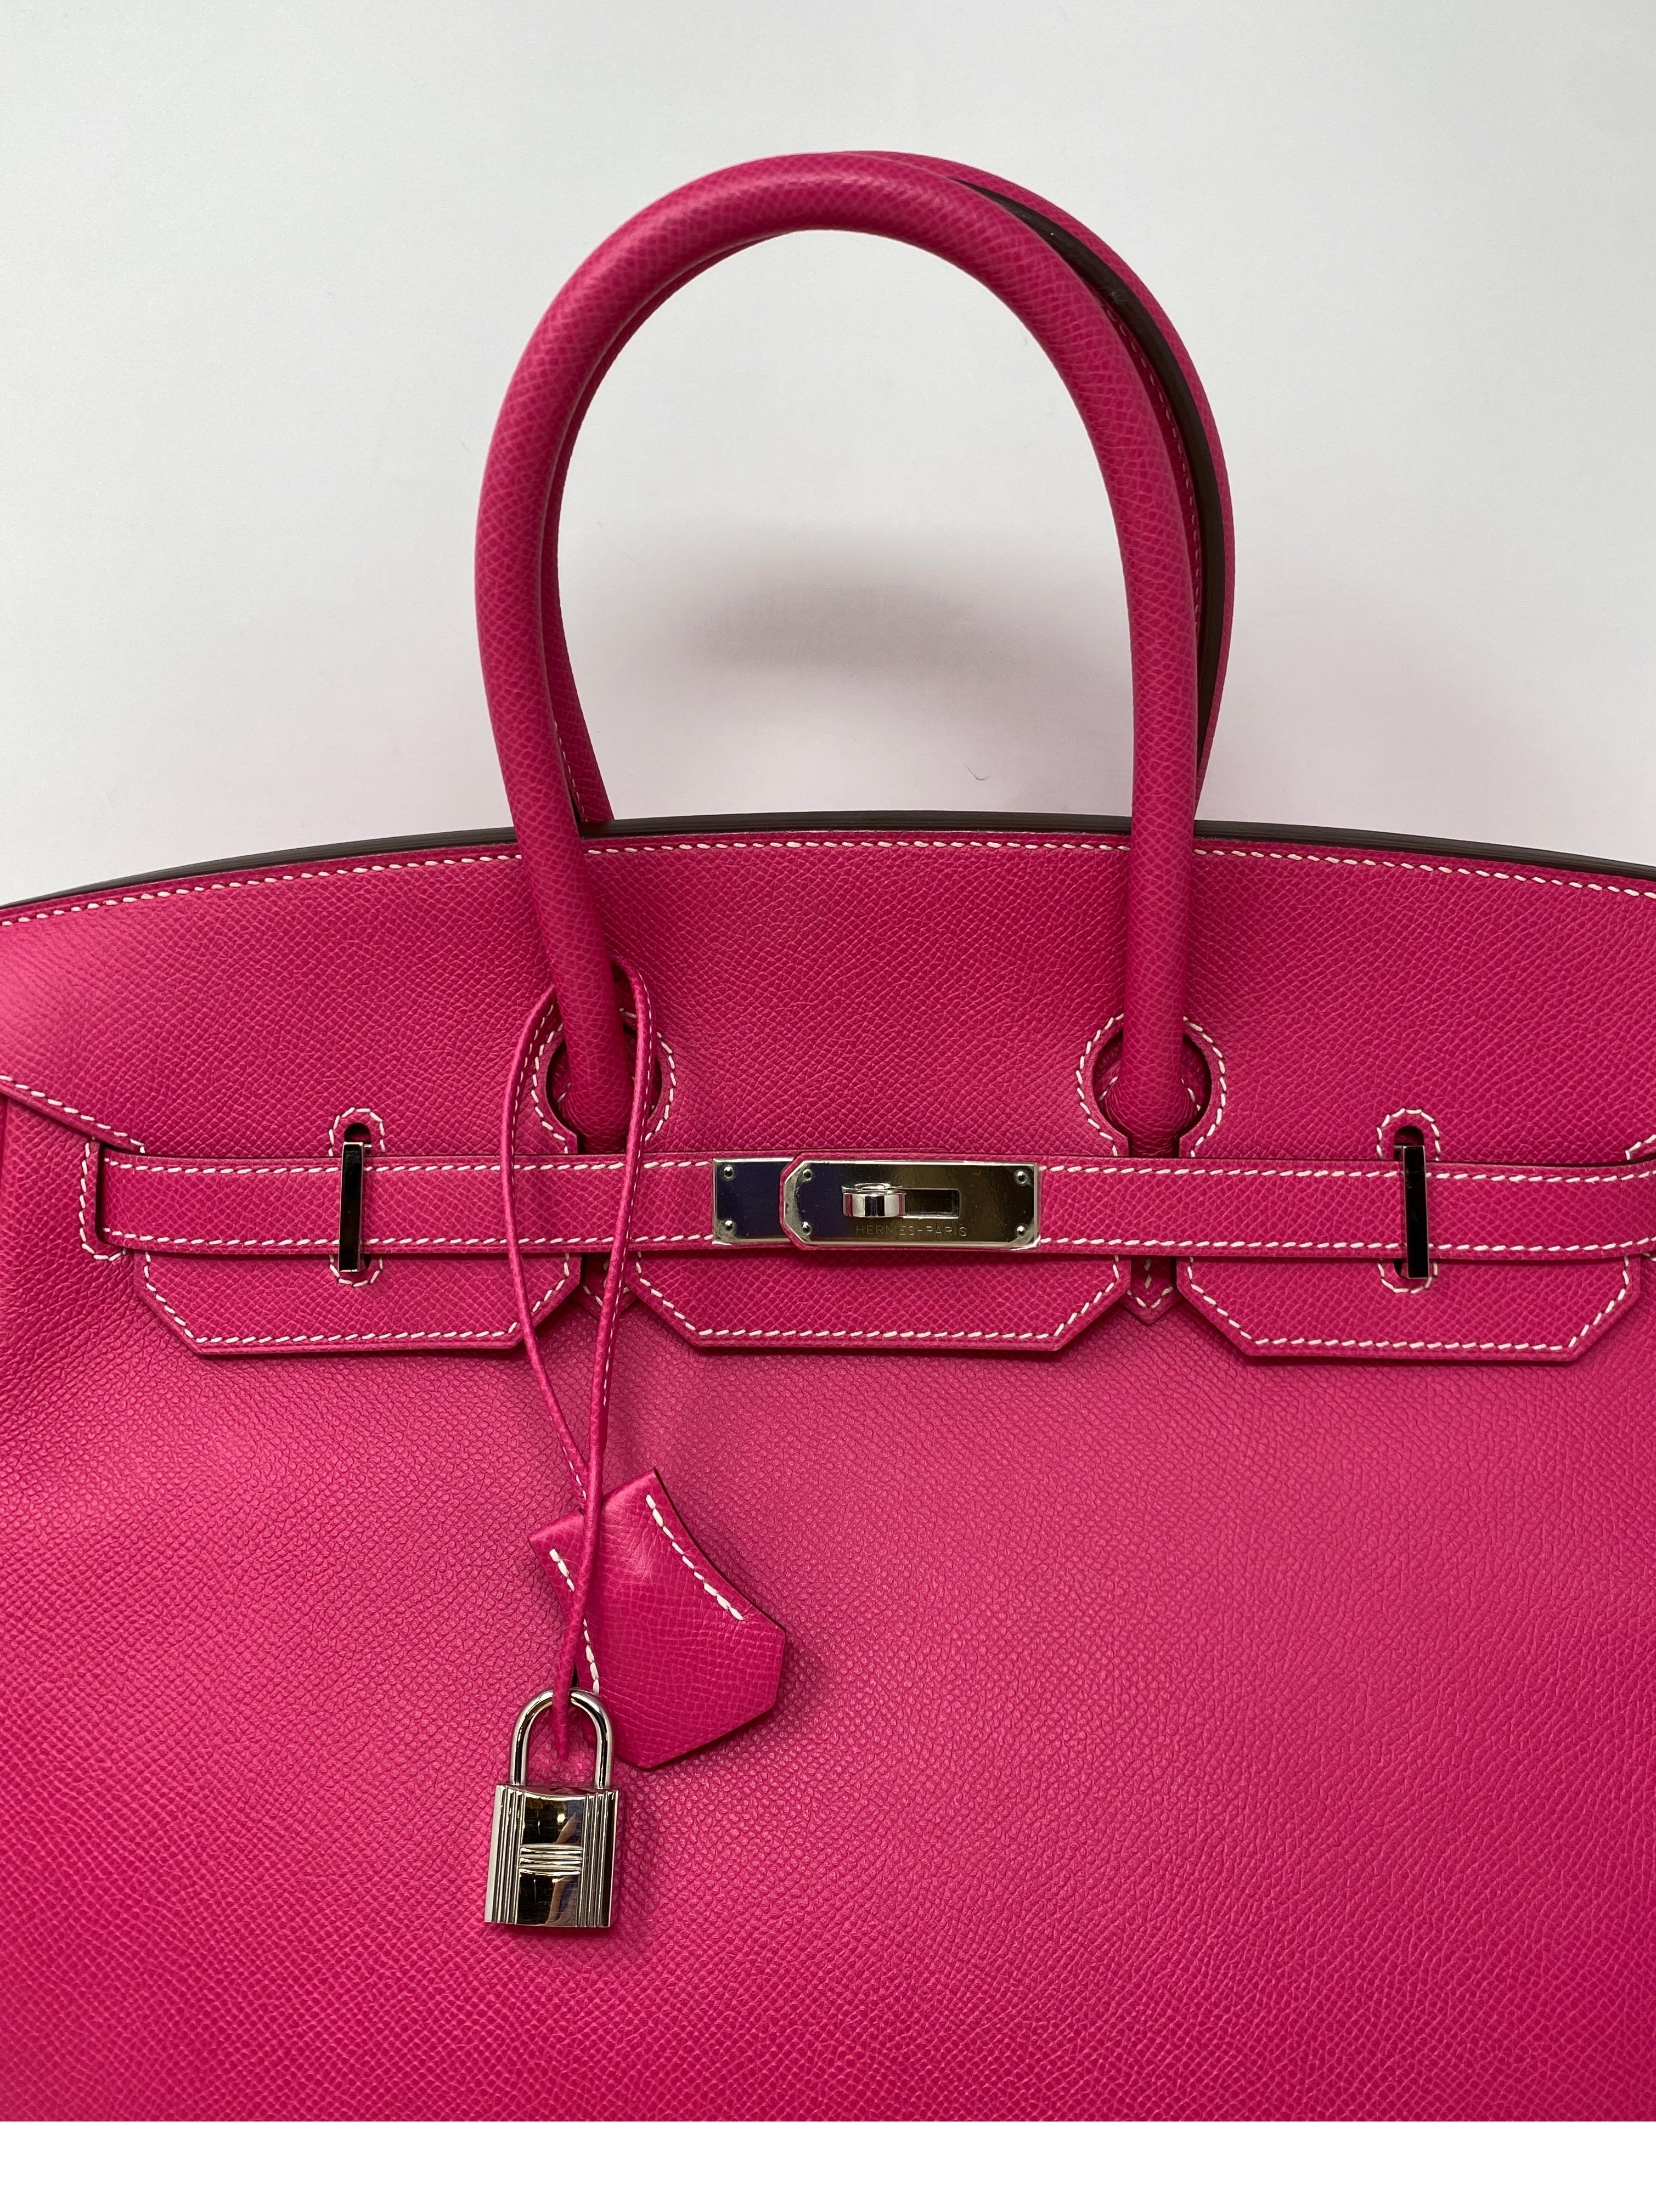 Hermes Rose Tyrien Candy Birkin 35 Bag. Hot pink color with silver palladium hardware. Candy limited with rouge red interior. Excellent condition. Plastic still on hardware. Fun bright color. Includes clochette, lock, keys, and dust bag. Guaranteed